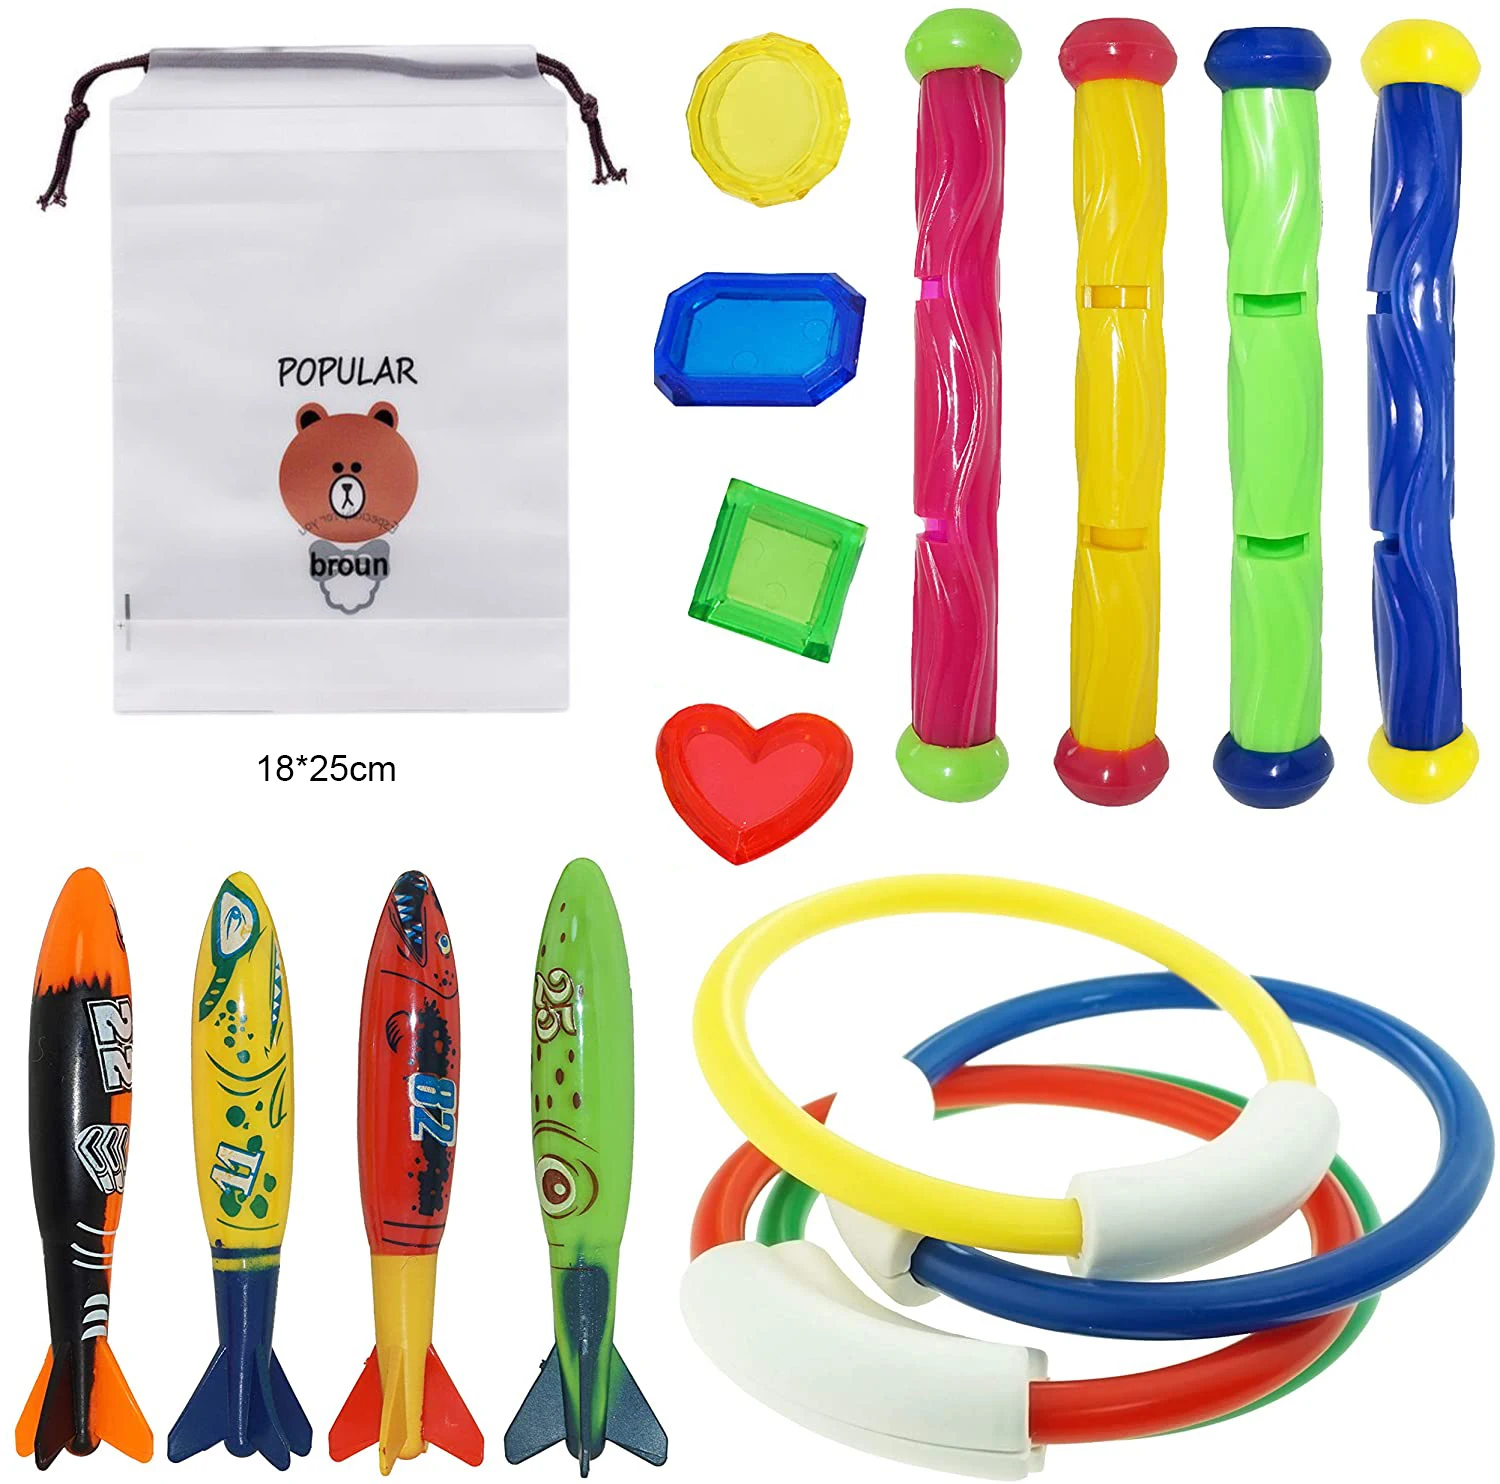 4 5 8 OPACC 19 Pack Diving Toys,Underwater Swimming/Diving Pool Toys Set Includes Pirate Treasures Toypedo Bandits, 3 Diving Rings, Water Grass, 